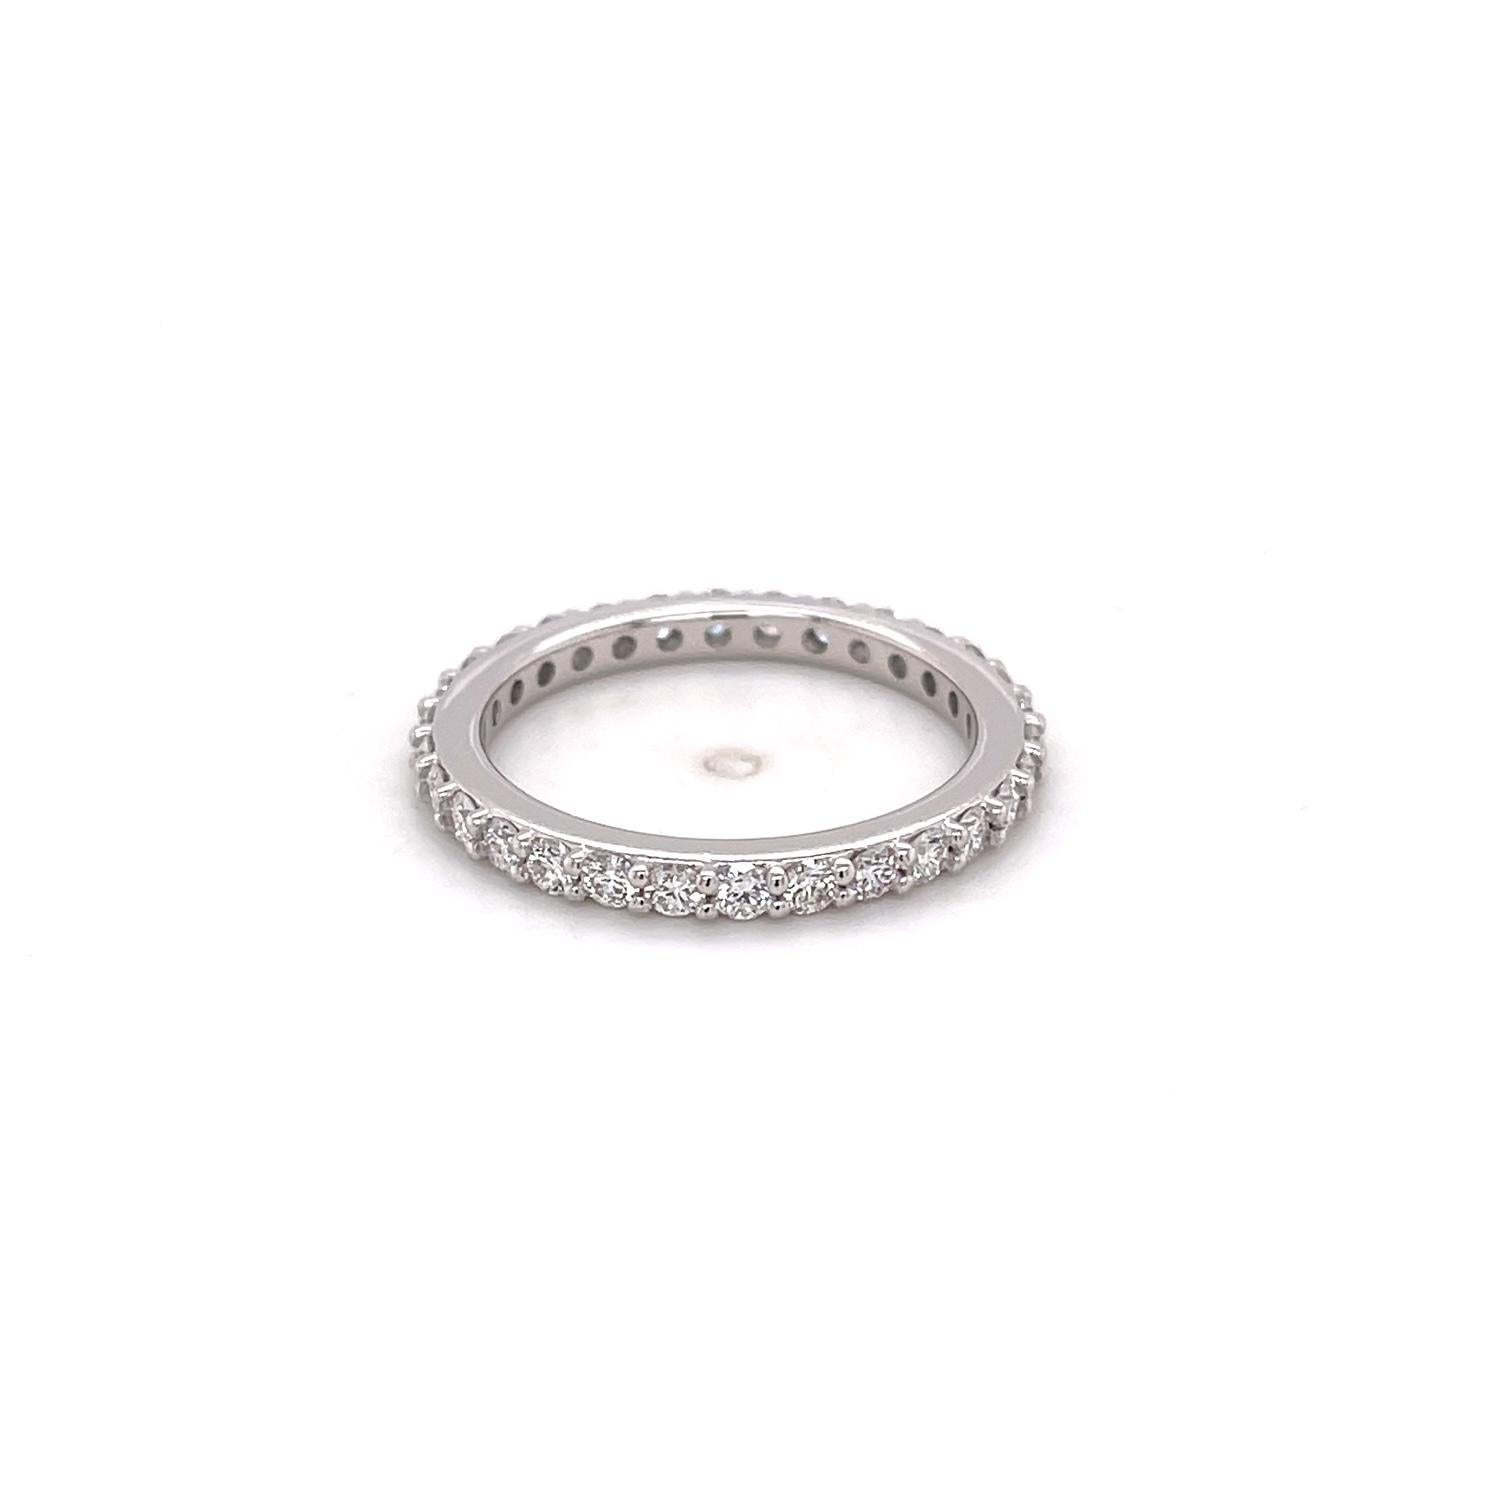 An 18k white gold anniversary band set with 30, 2mm white round F color VS clarity diamonds for a total of .9 total carats. This ring was made and designed by llyn strong.
This ring can be made into any size - price may vary.